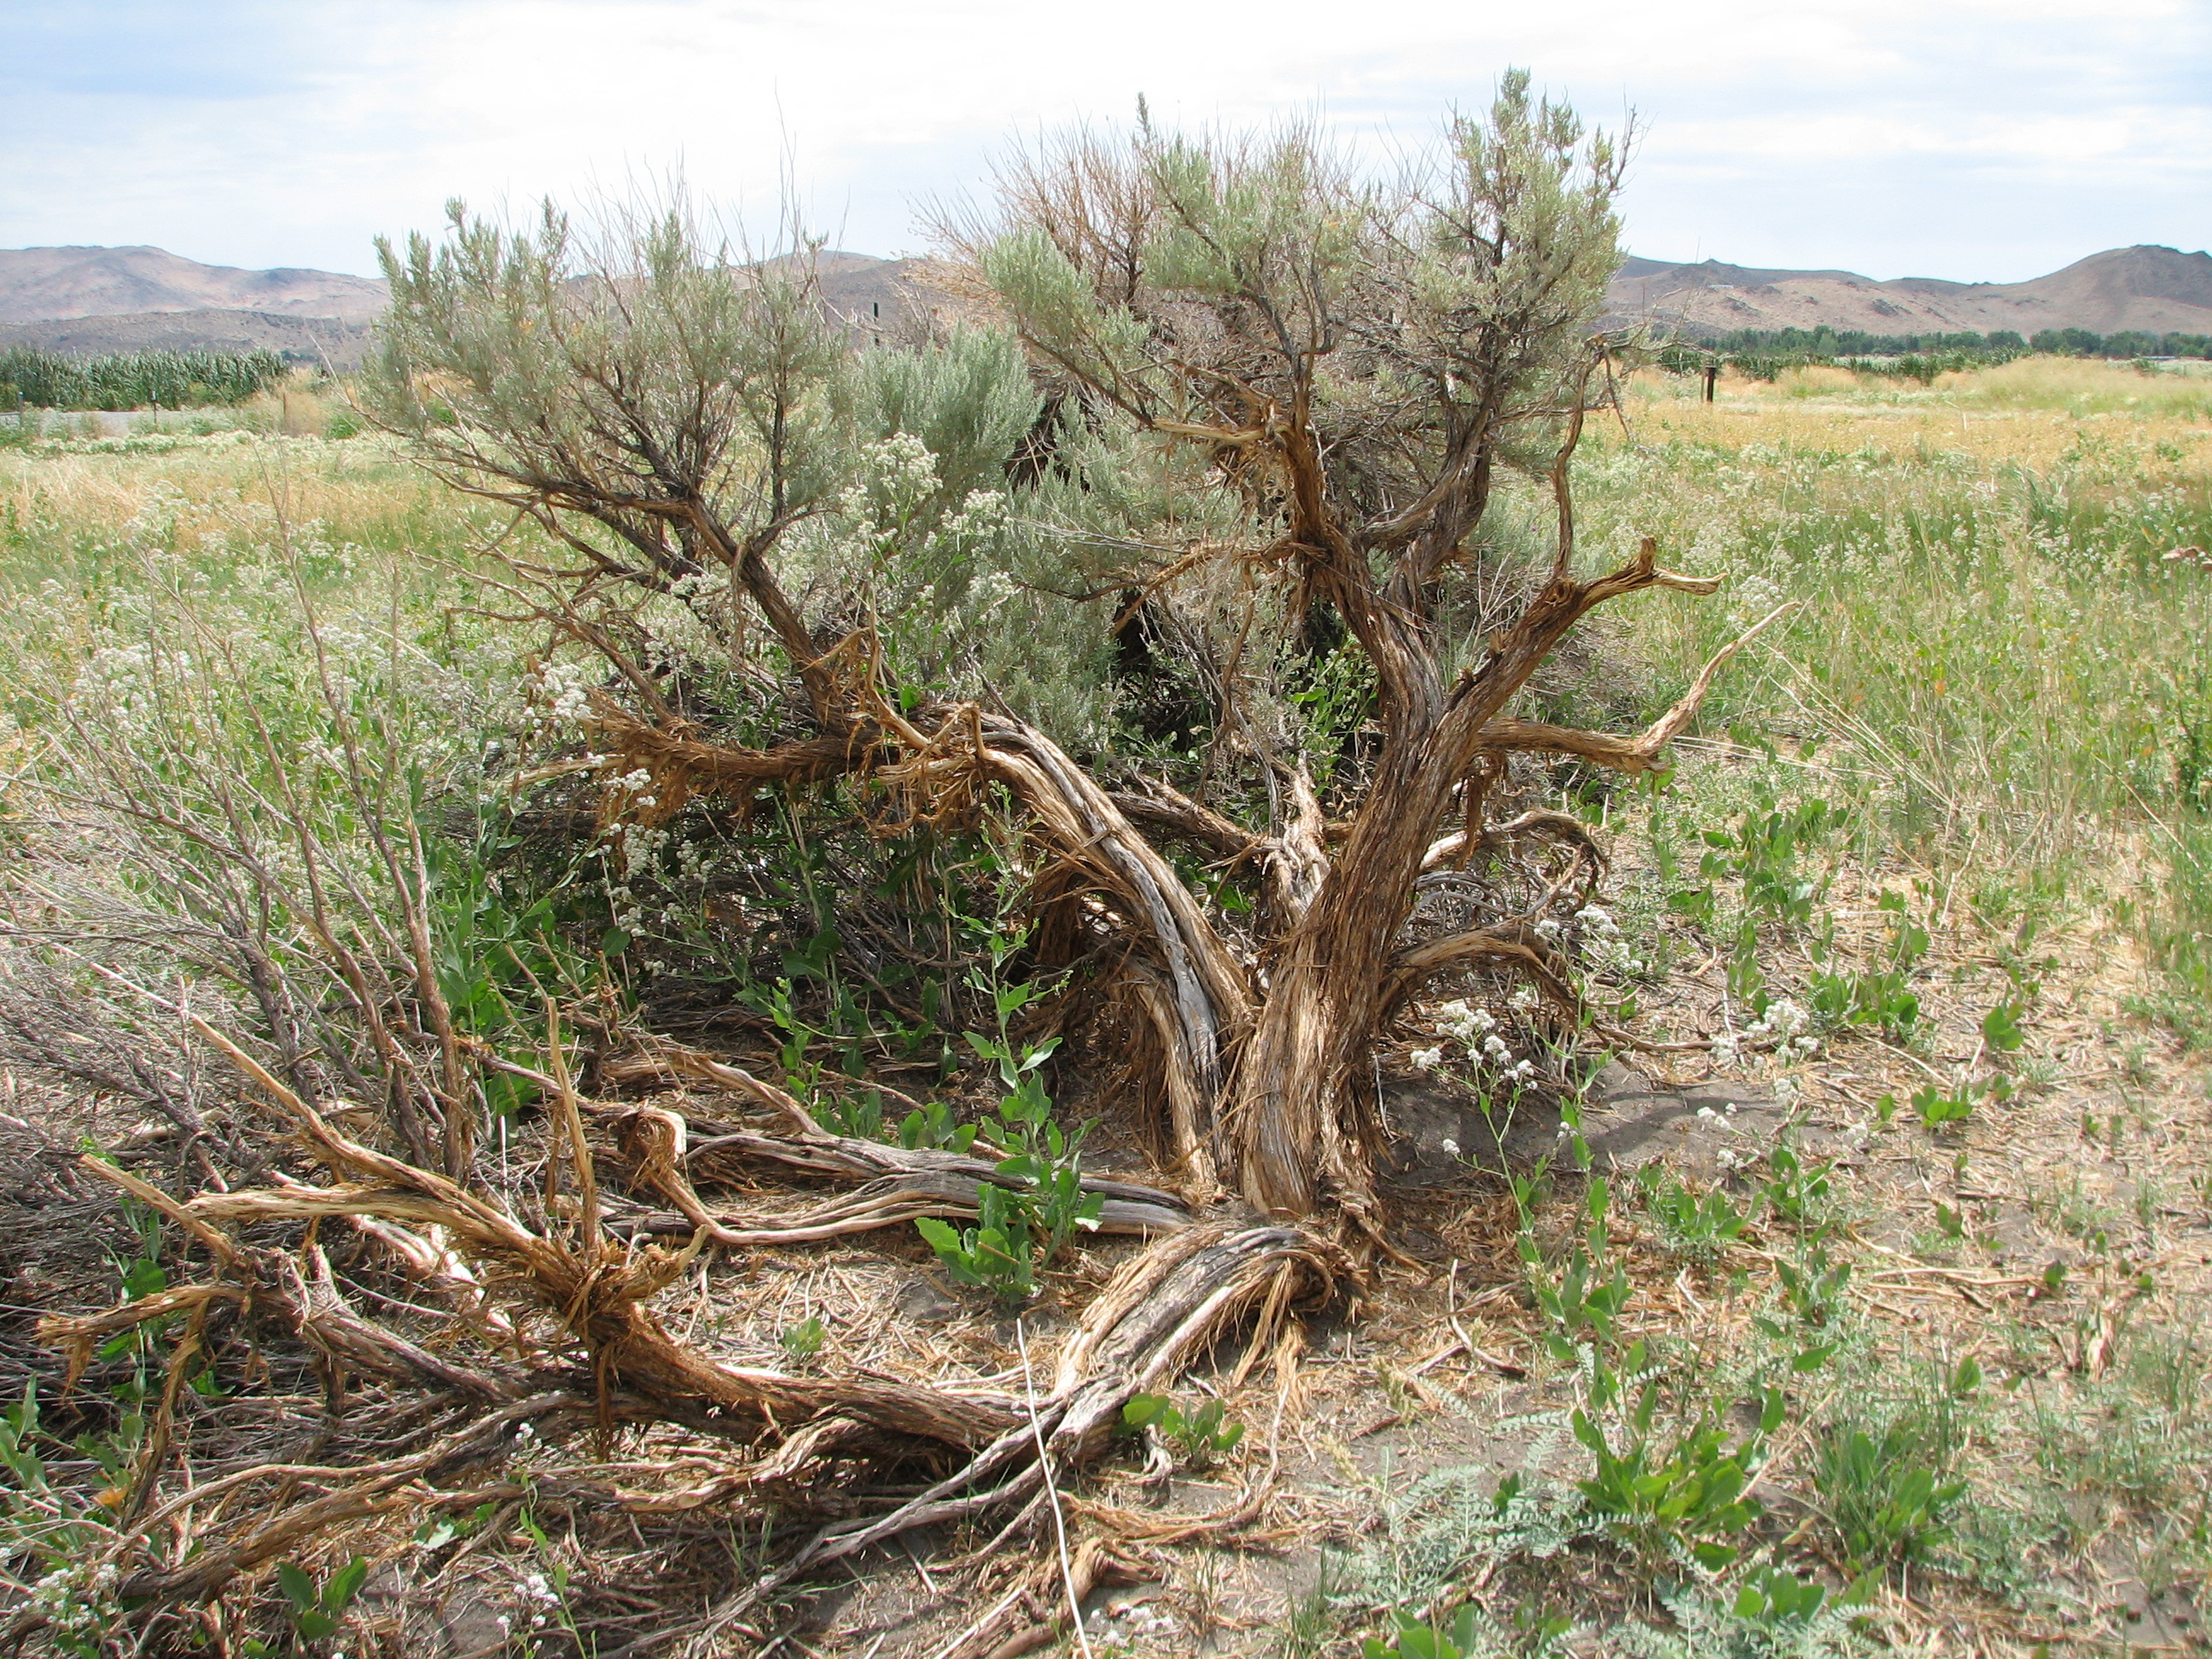 File:Sagebrush with shattered trunk.jpg - Wikimedia Commons